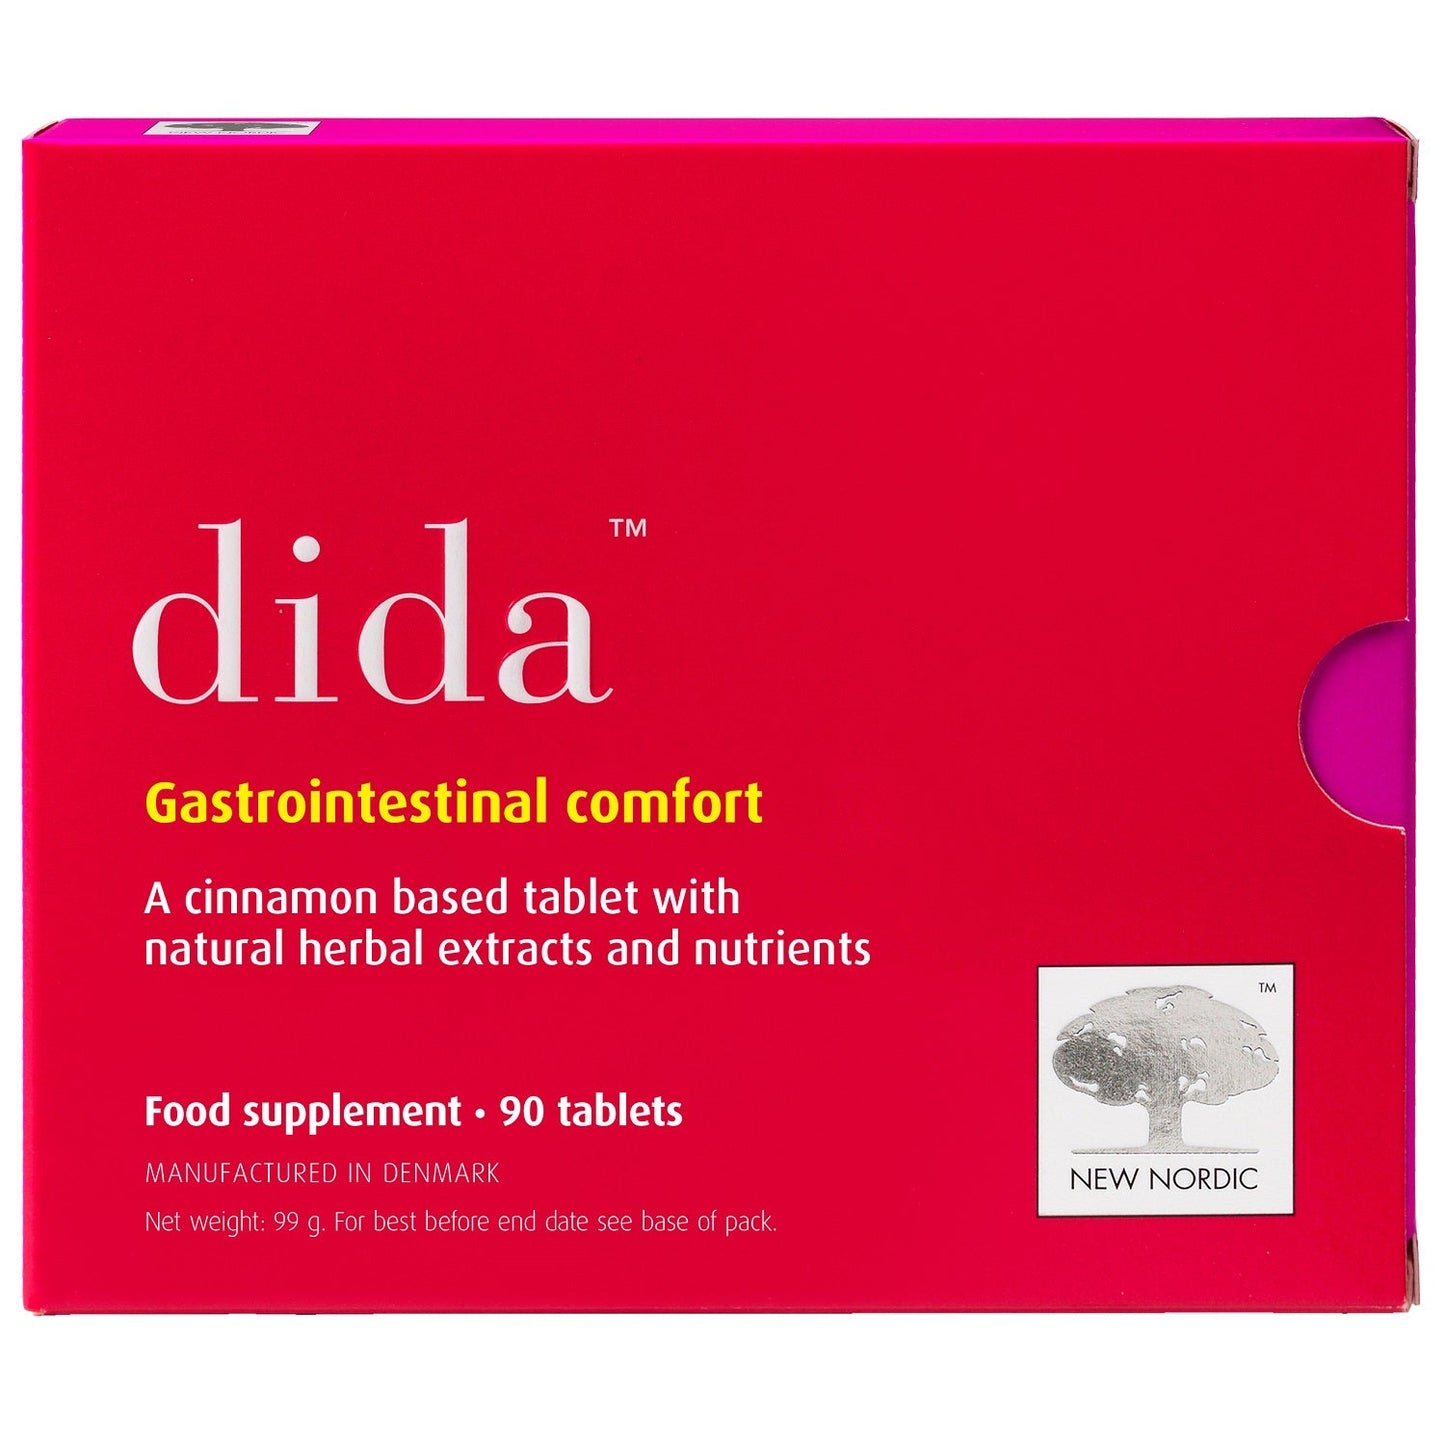 New Nordic Dida 90 tablets